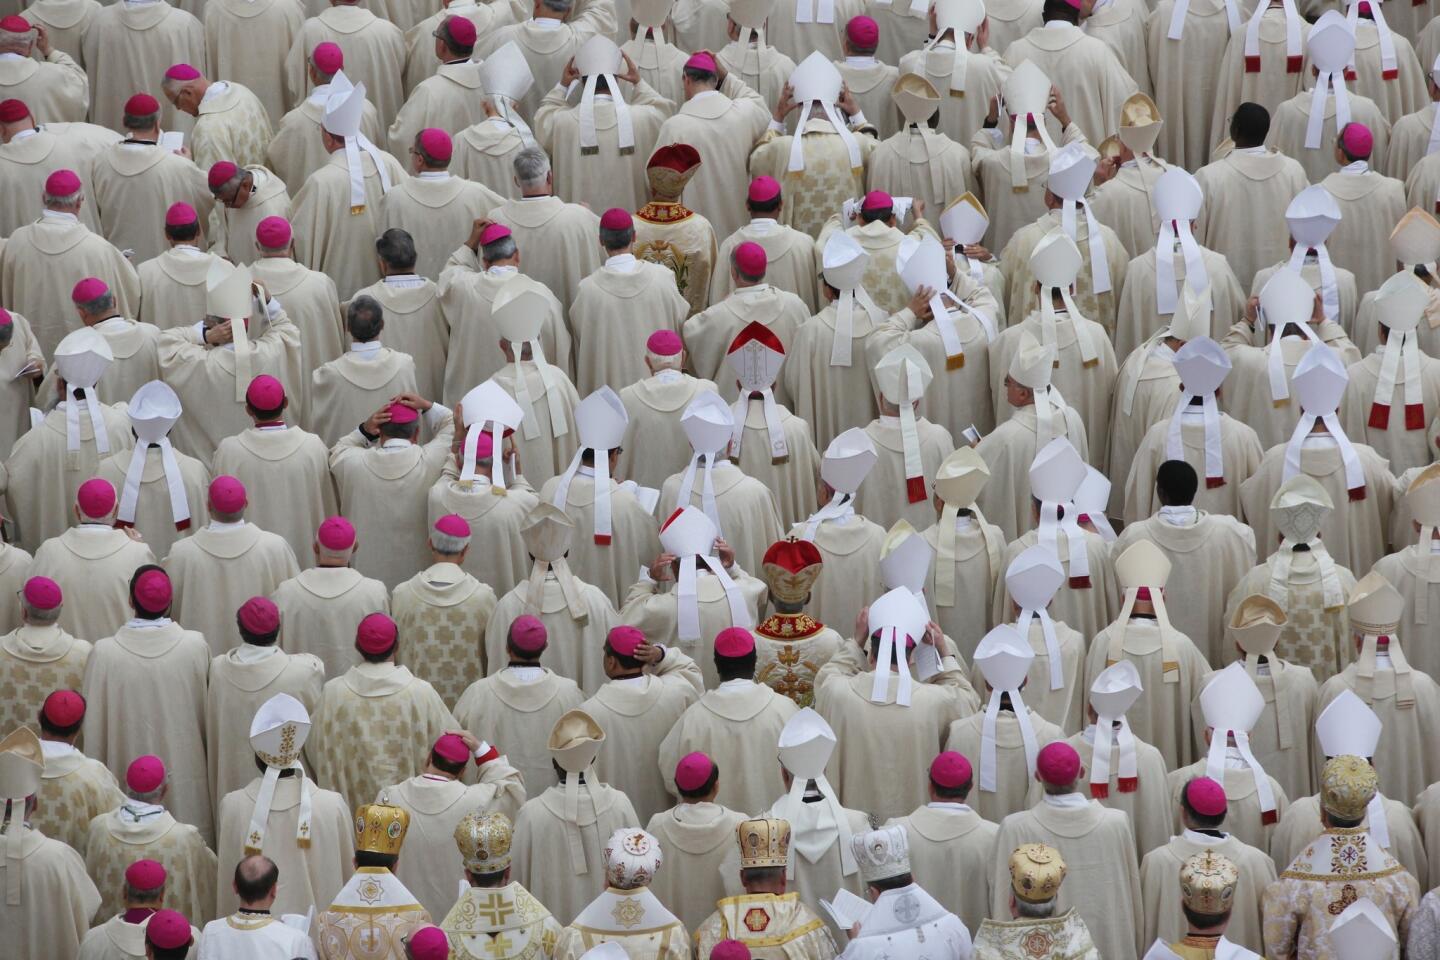 Bishops attend the canonization Mass for popes John XXIII and John Paul II at St. Peter's Square at the Vatican.